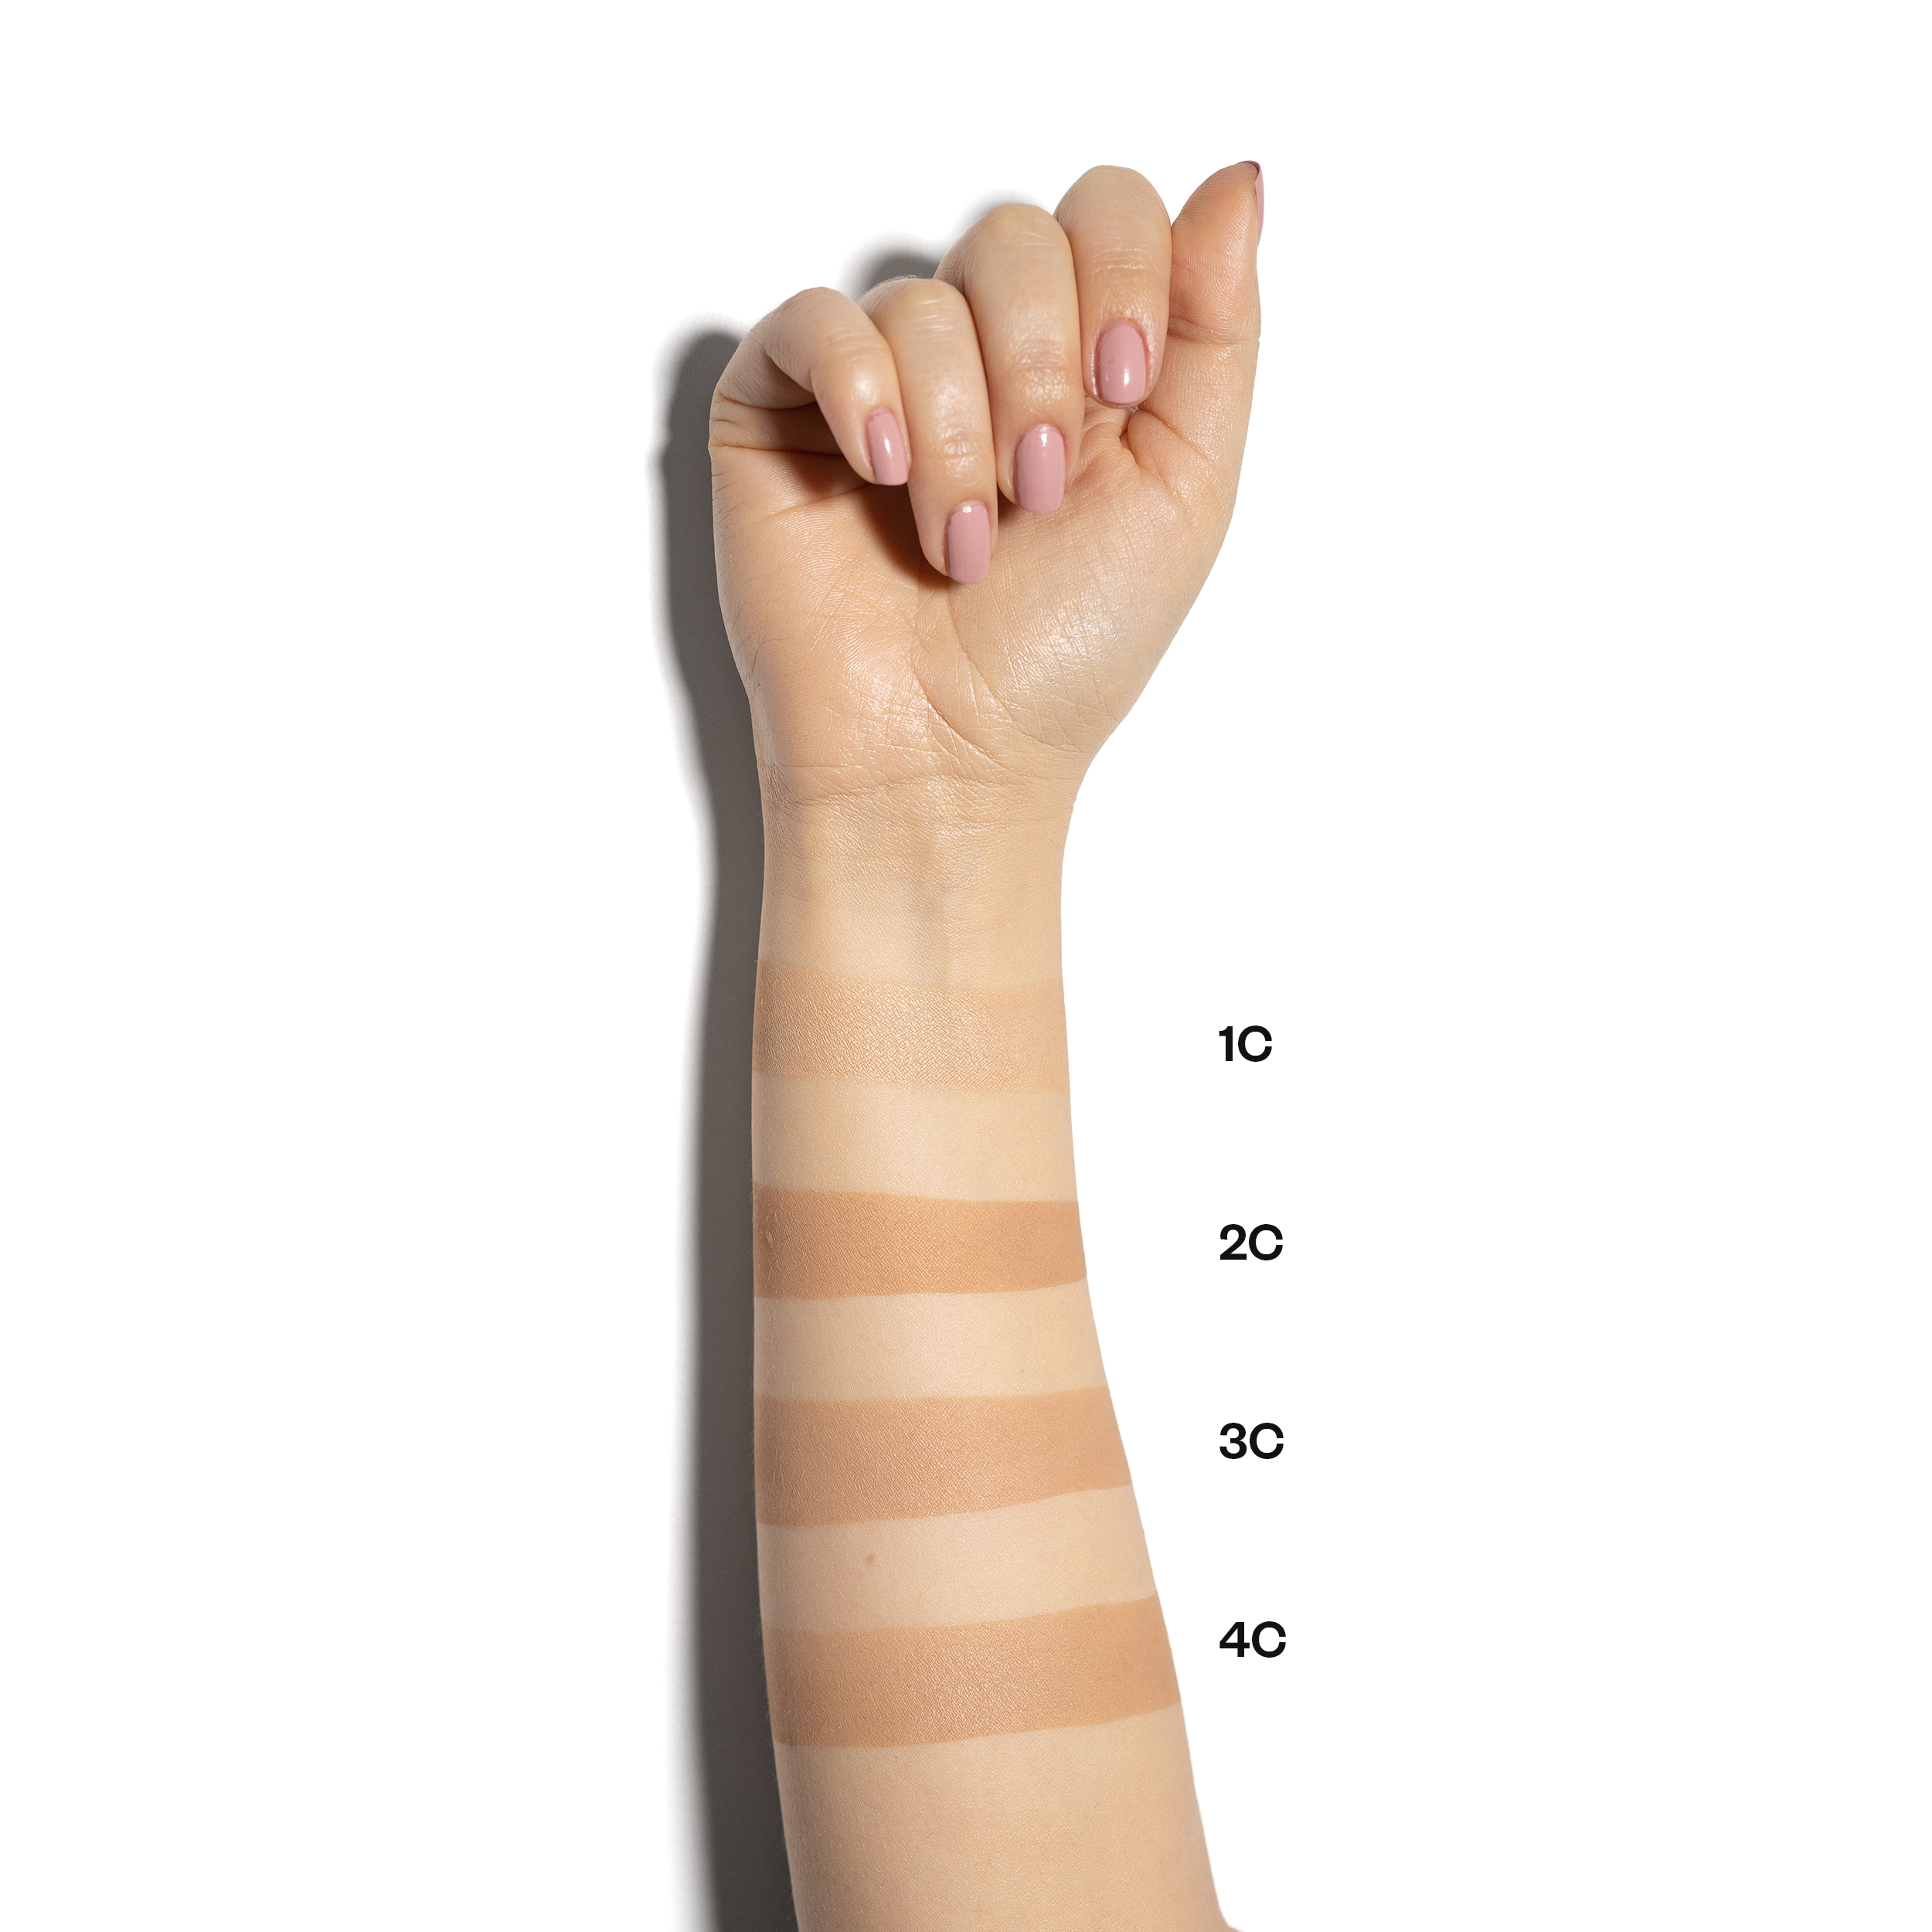 Swatches on the Skin With Numbers (1)